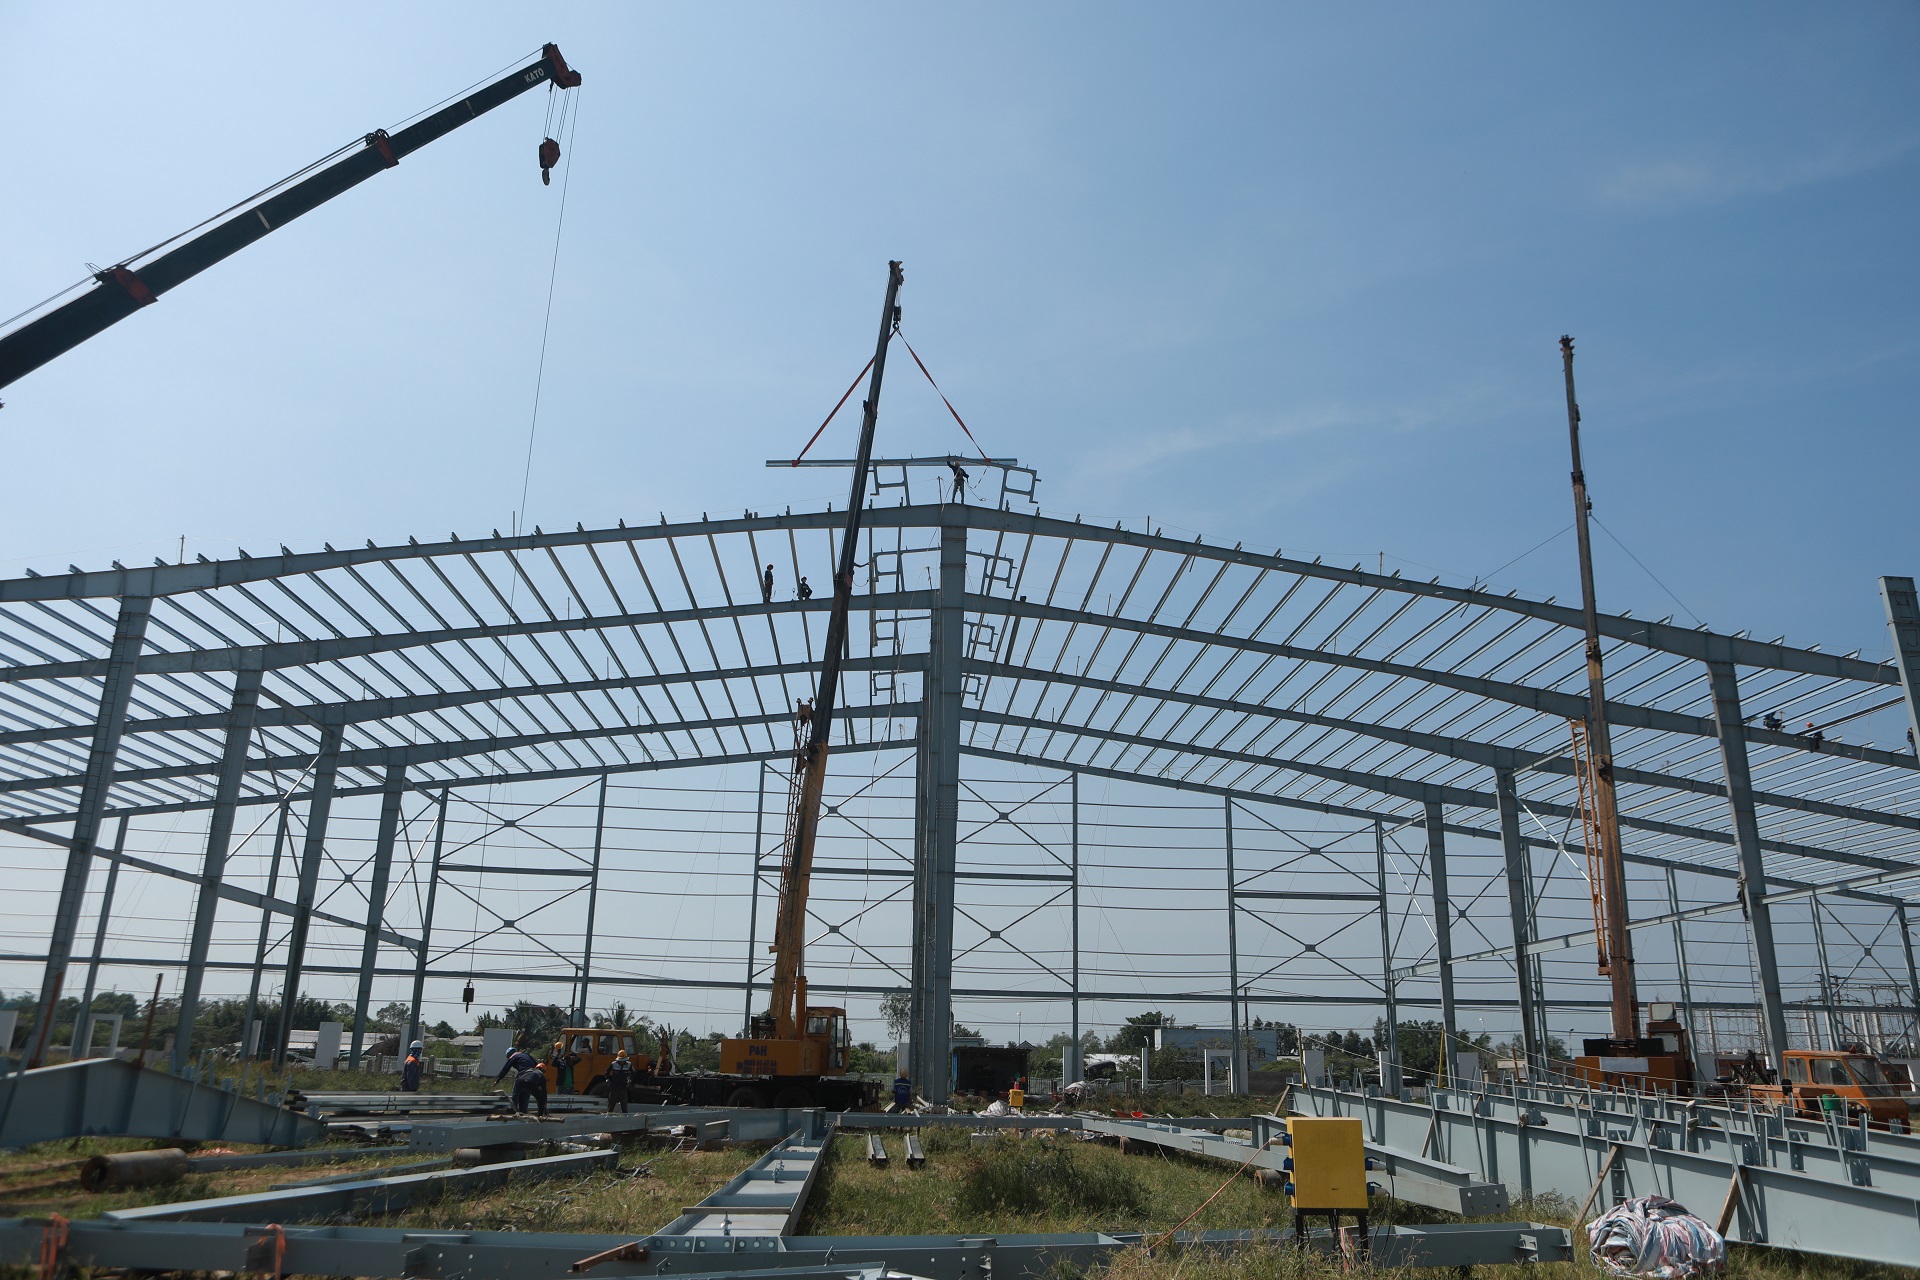 Production & erection of steel structures